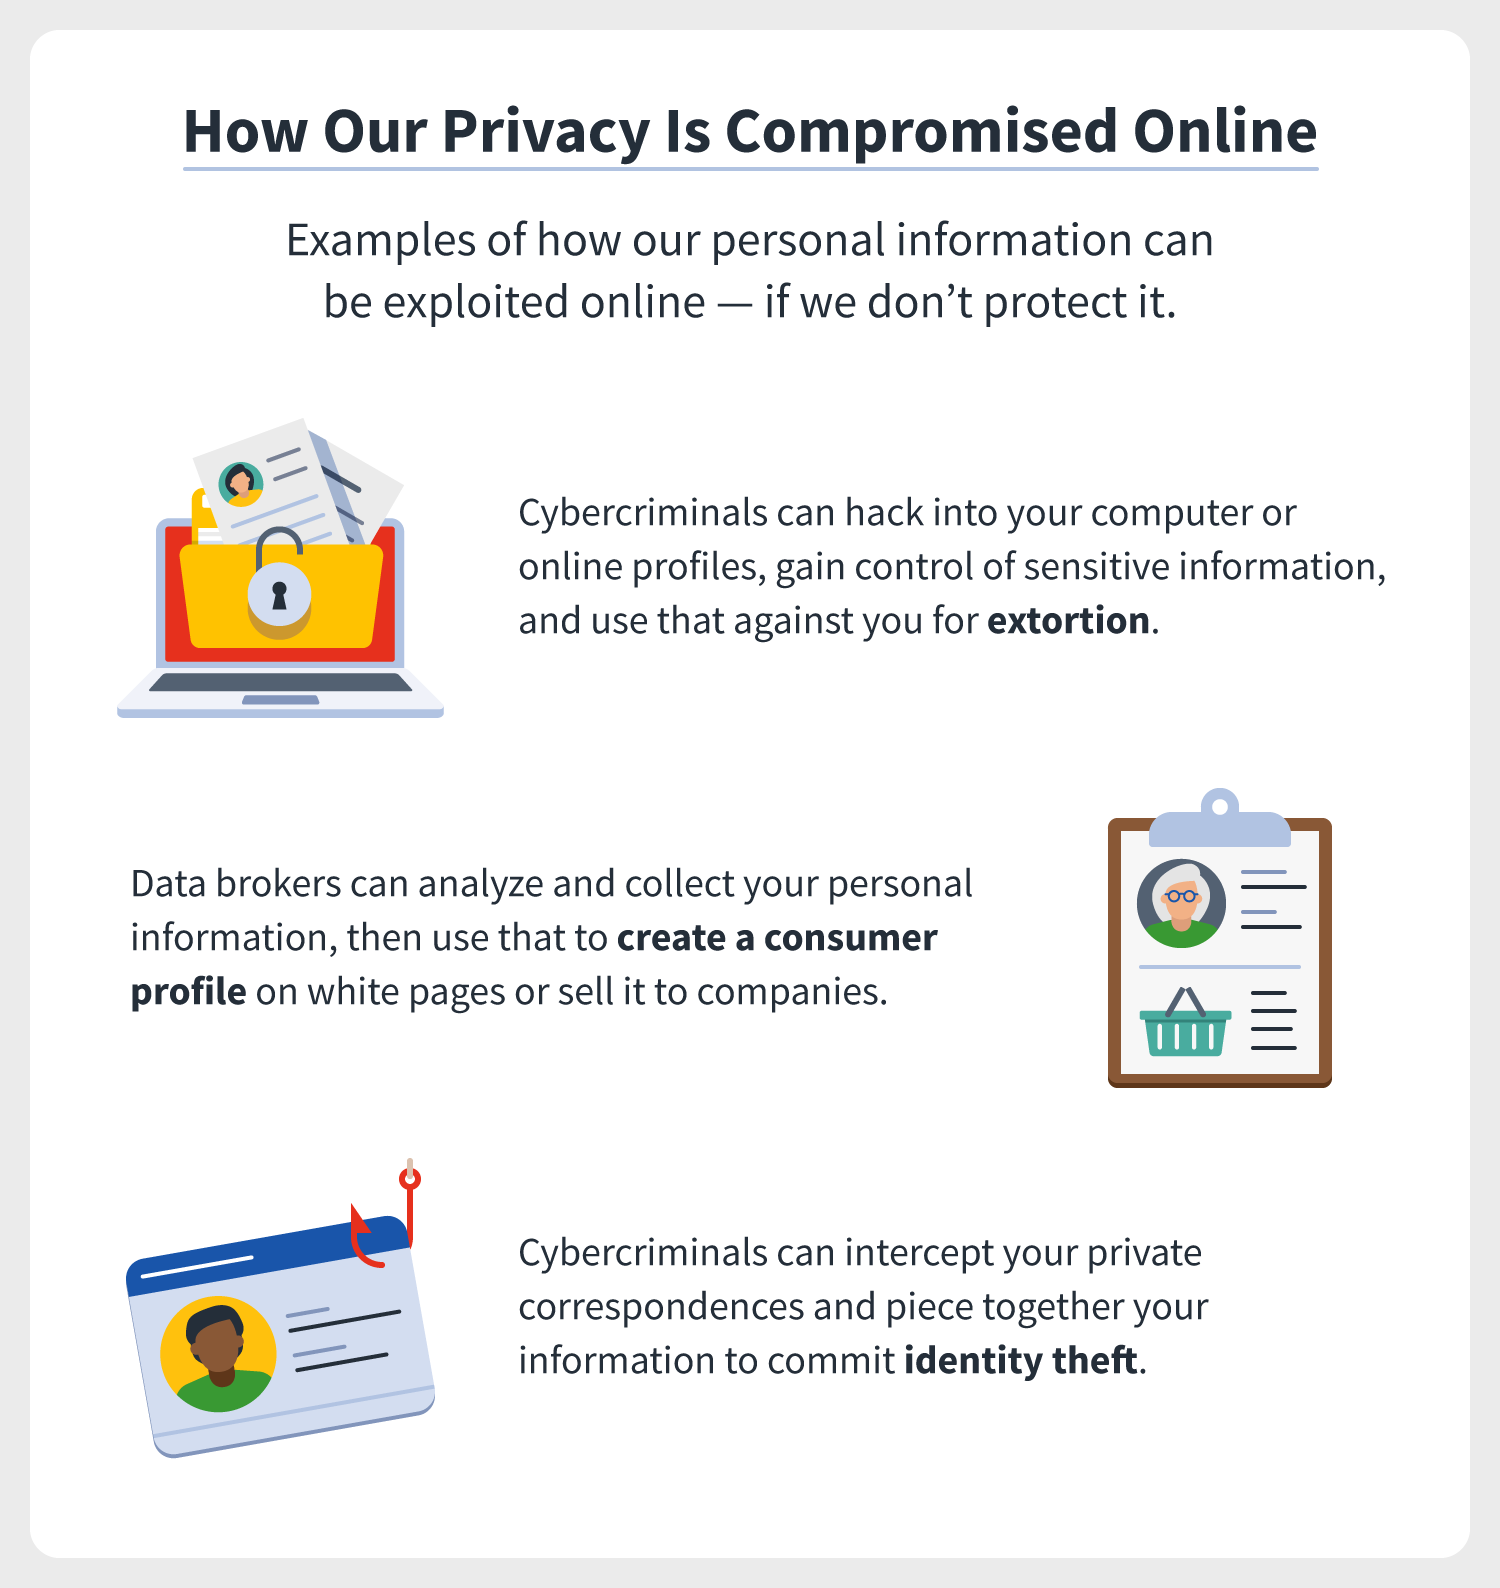 three examples of how our personal information can be compromised online, included to be used for extortion, identity theft, and data broker sites